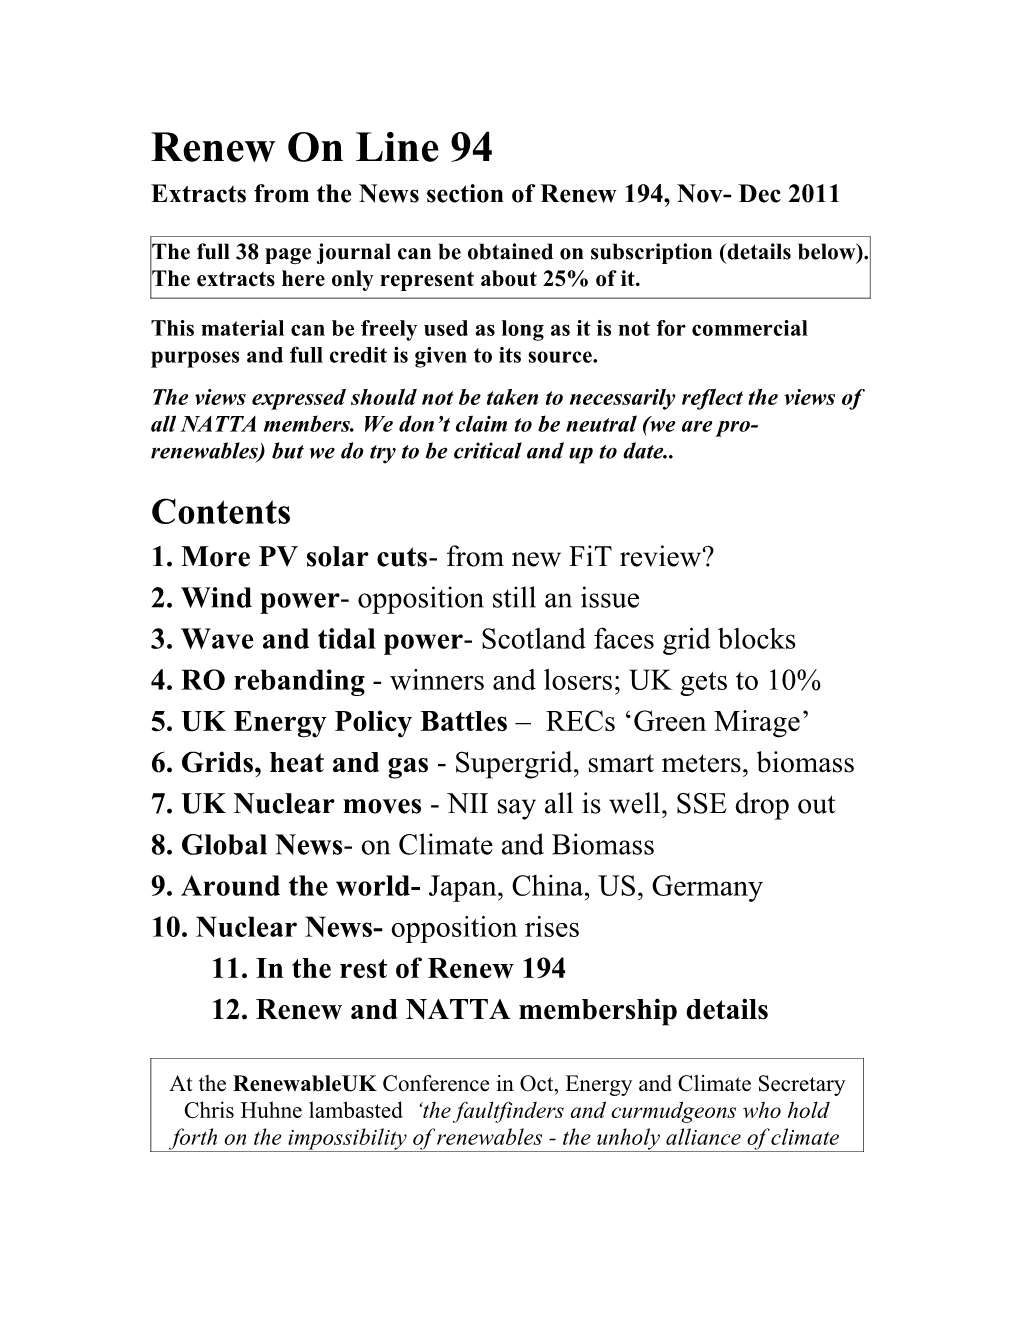 Extracts from the News Section of Renew 194, Nov- Dec 2011